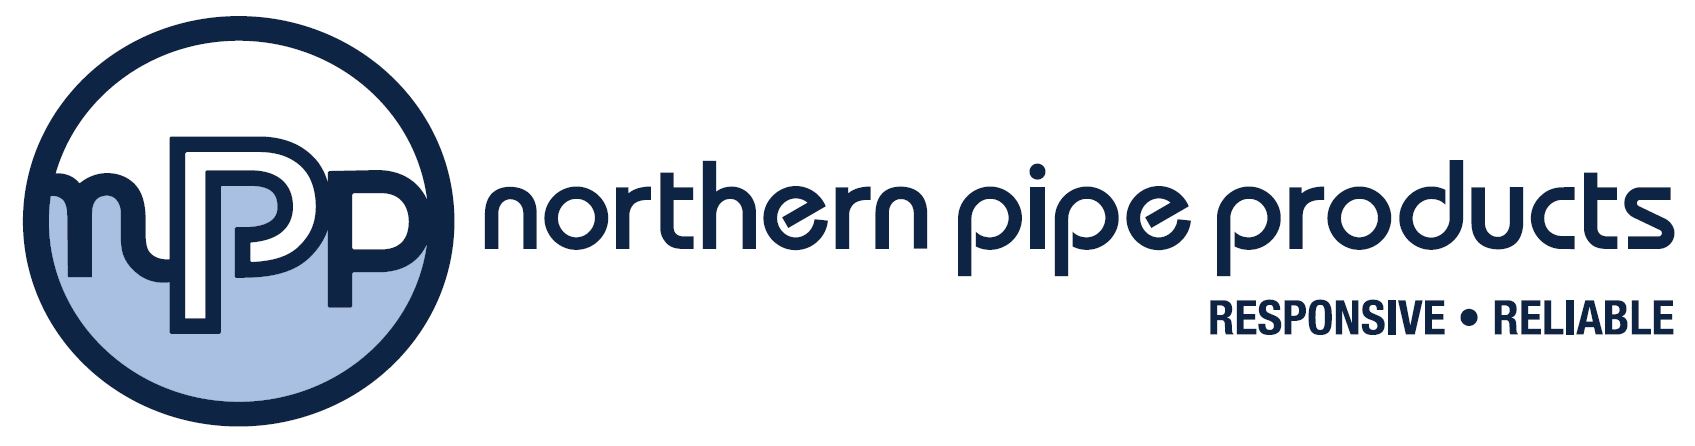 Northern Pipe Products